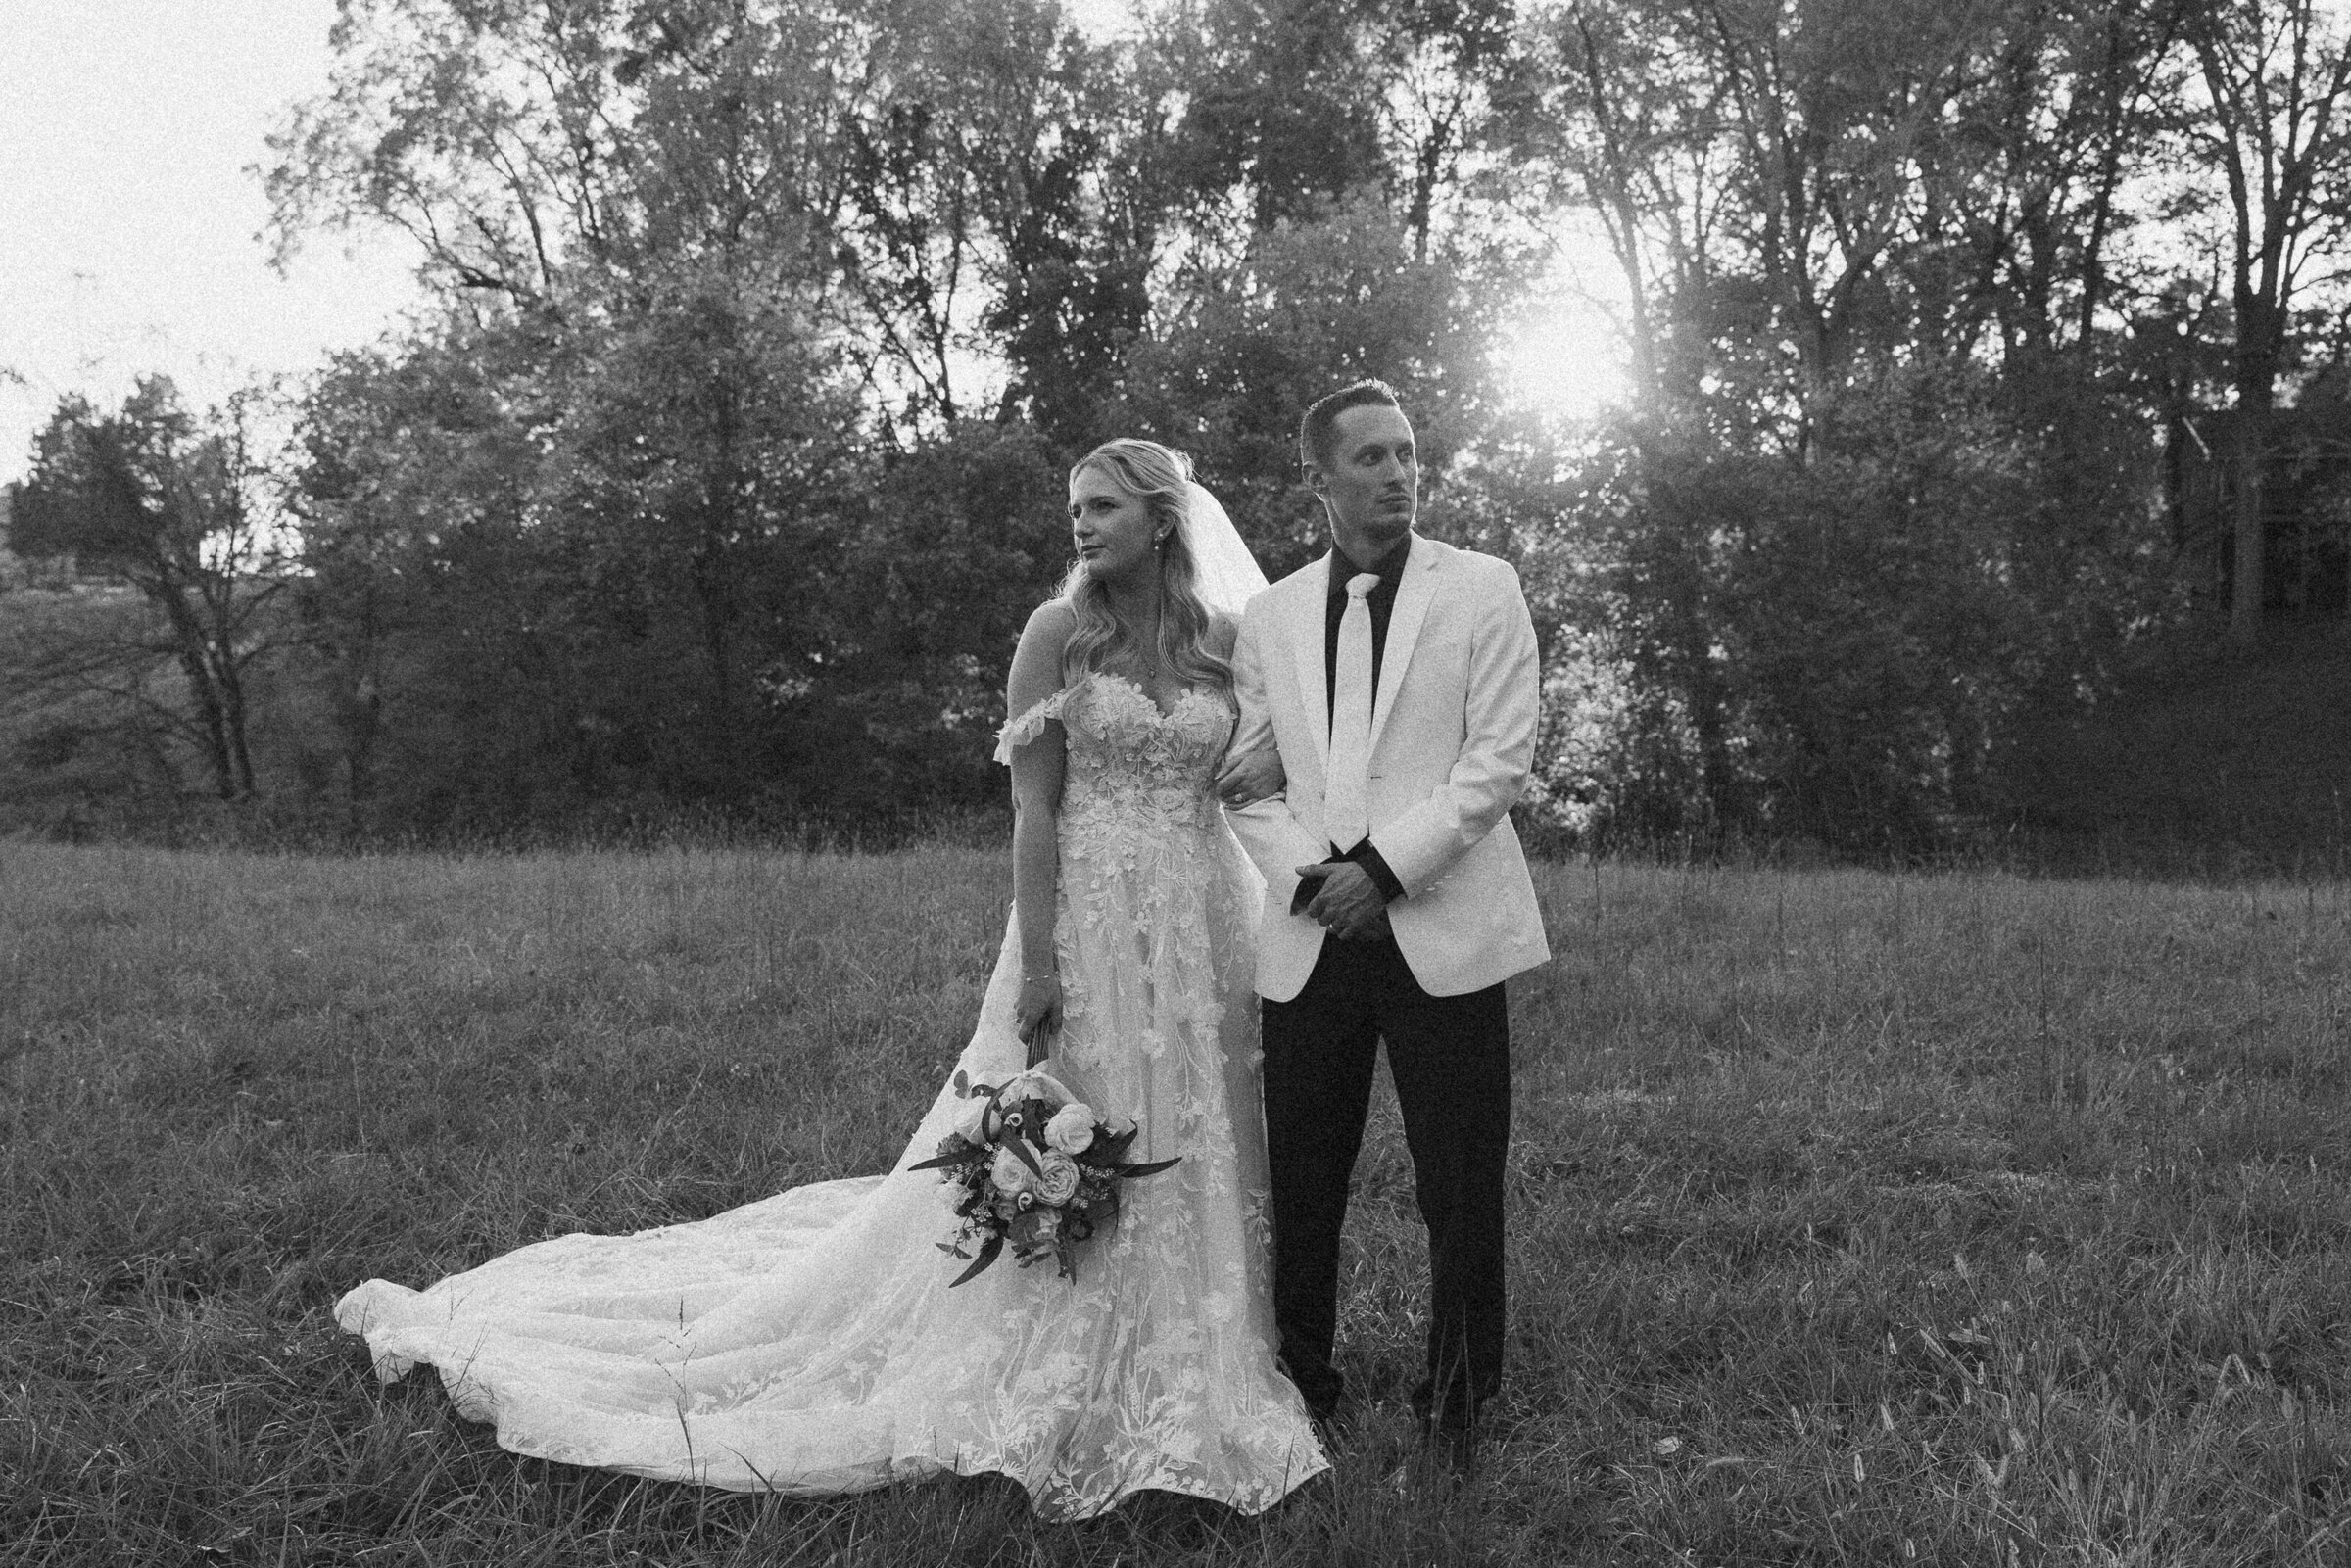 Black and white portrait of bride and groom in a field.